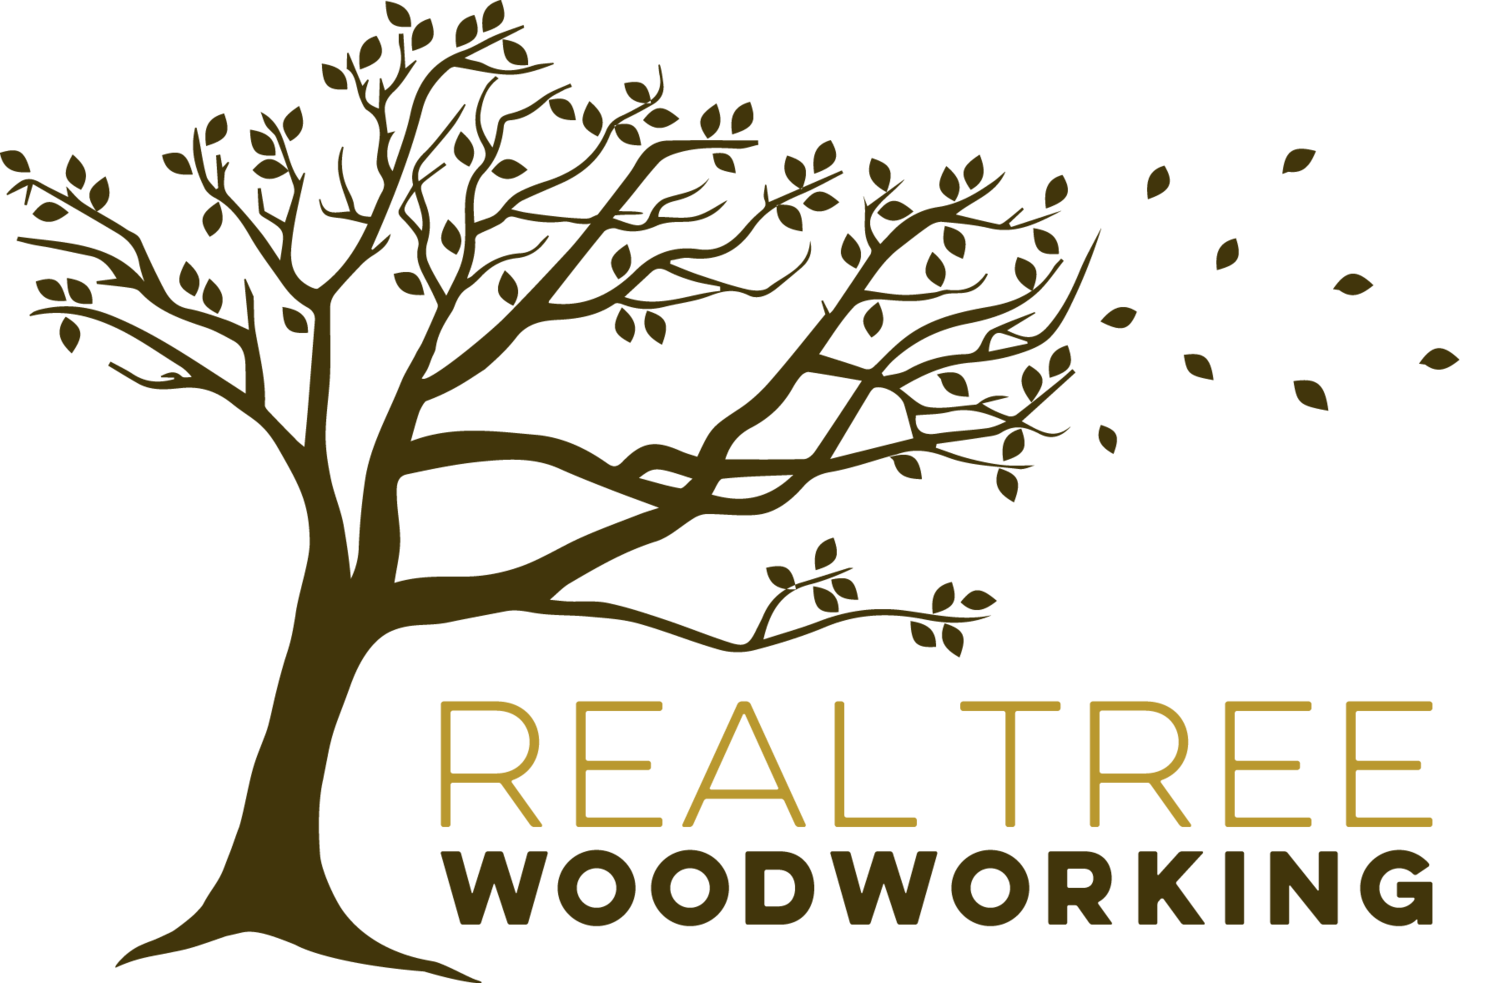 REAL TREE WOODWORKING